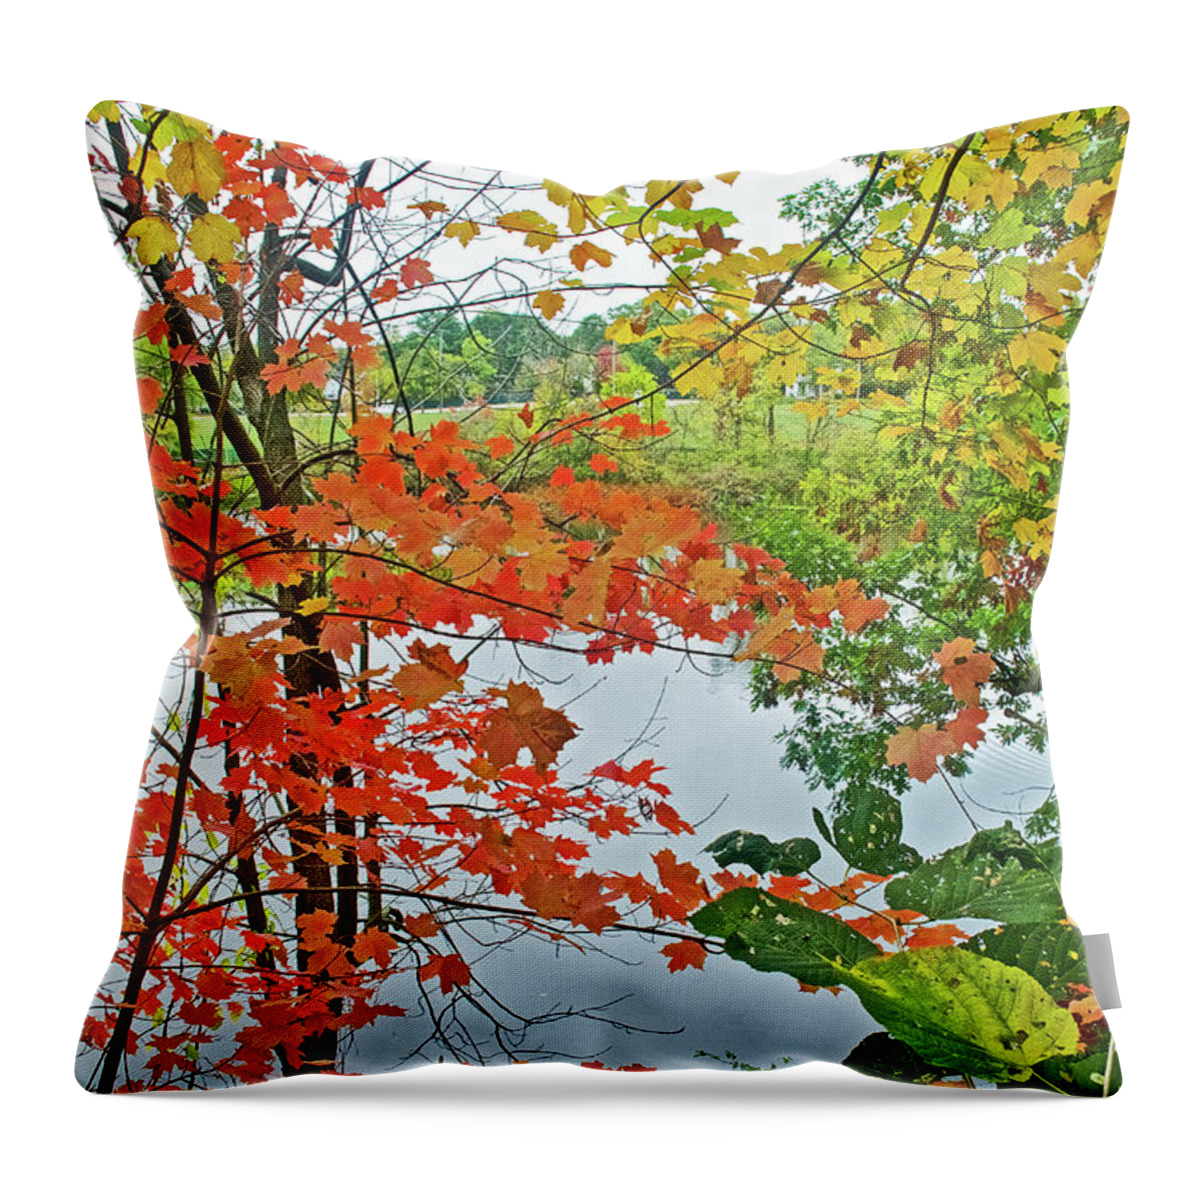 Rogue River Through Autumn Leaves In Rockford Throw Pillow featuring the photograph Rogue River through Autumn Leaves in Rockford, Michigan by Ruth Hager